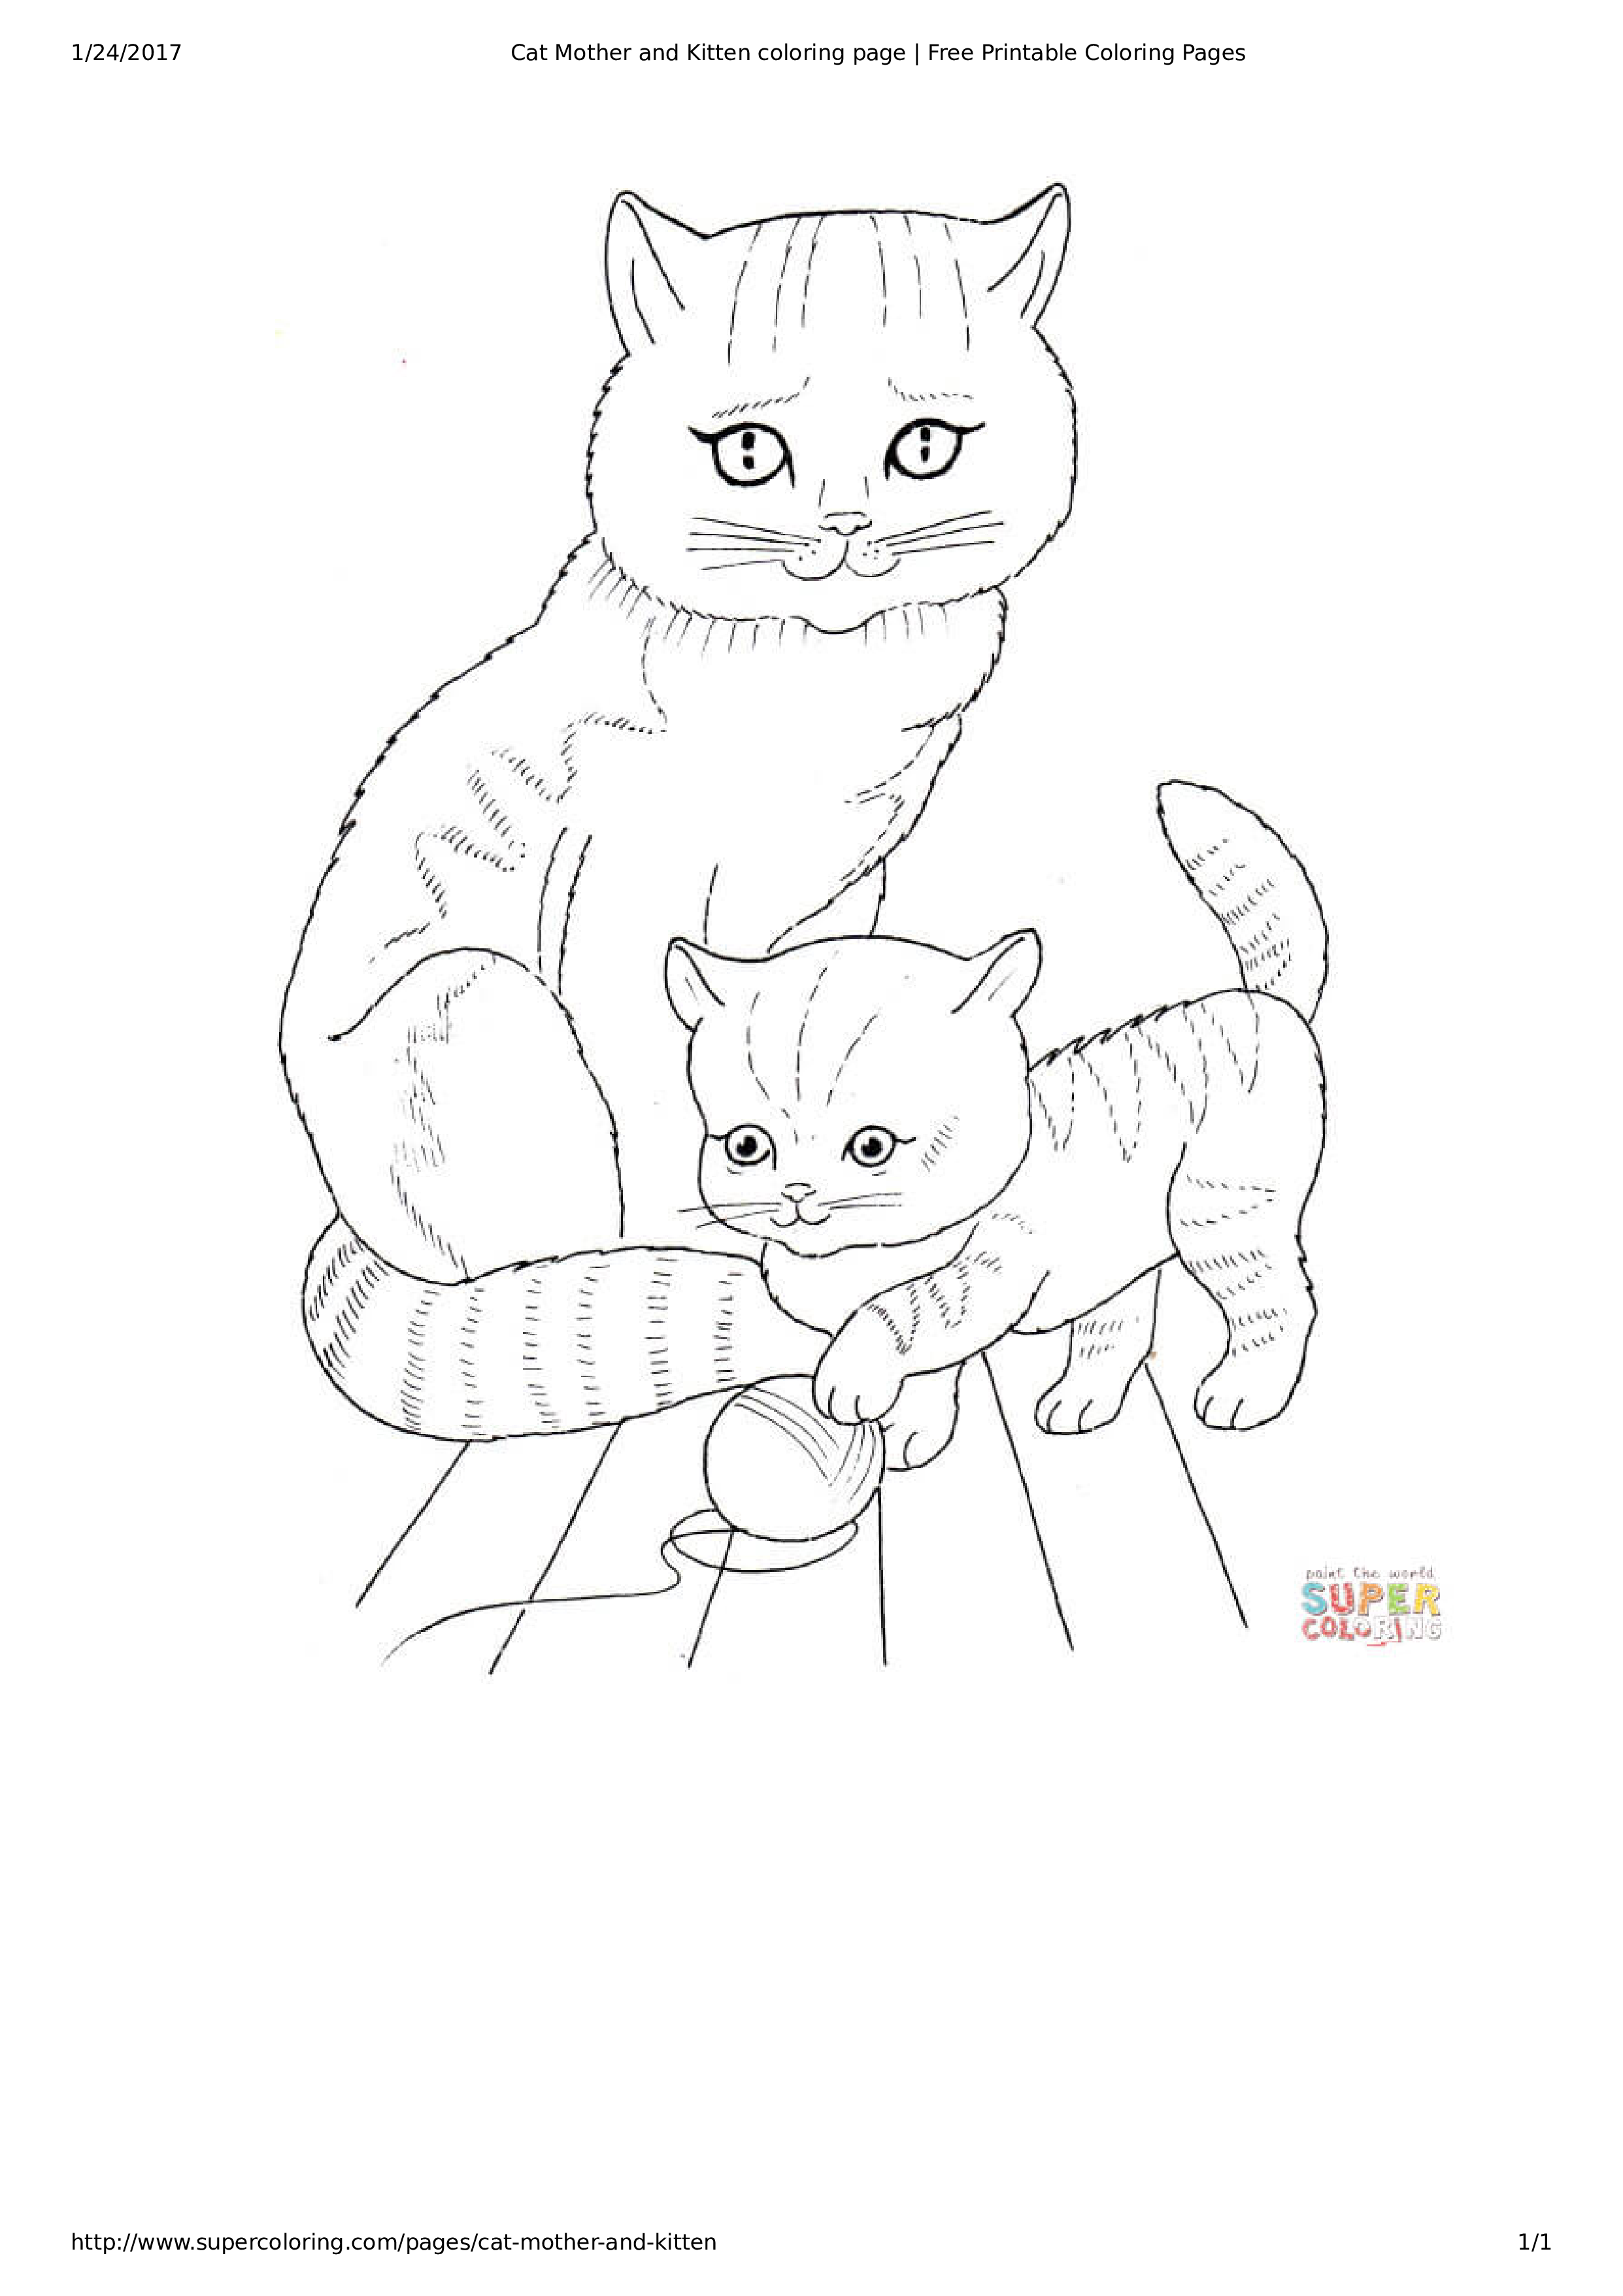 Cat And Kitten Coloring Page How To Create A Cat And Kitten Coloring Page Download Th